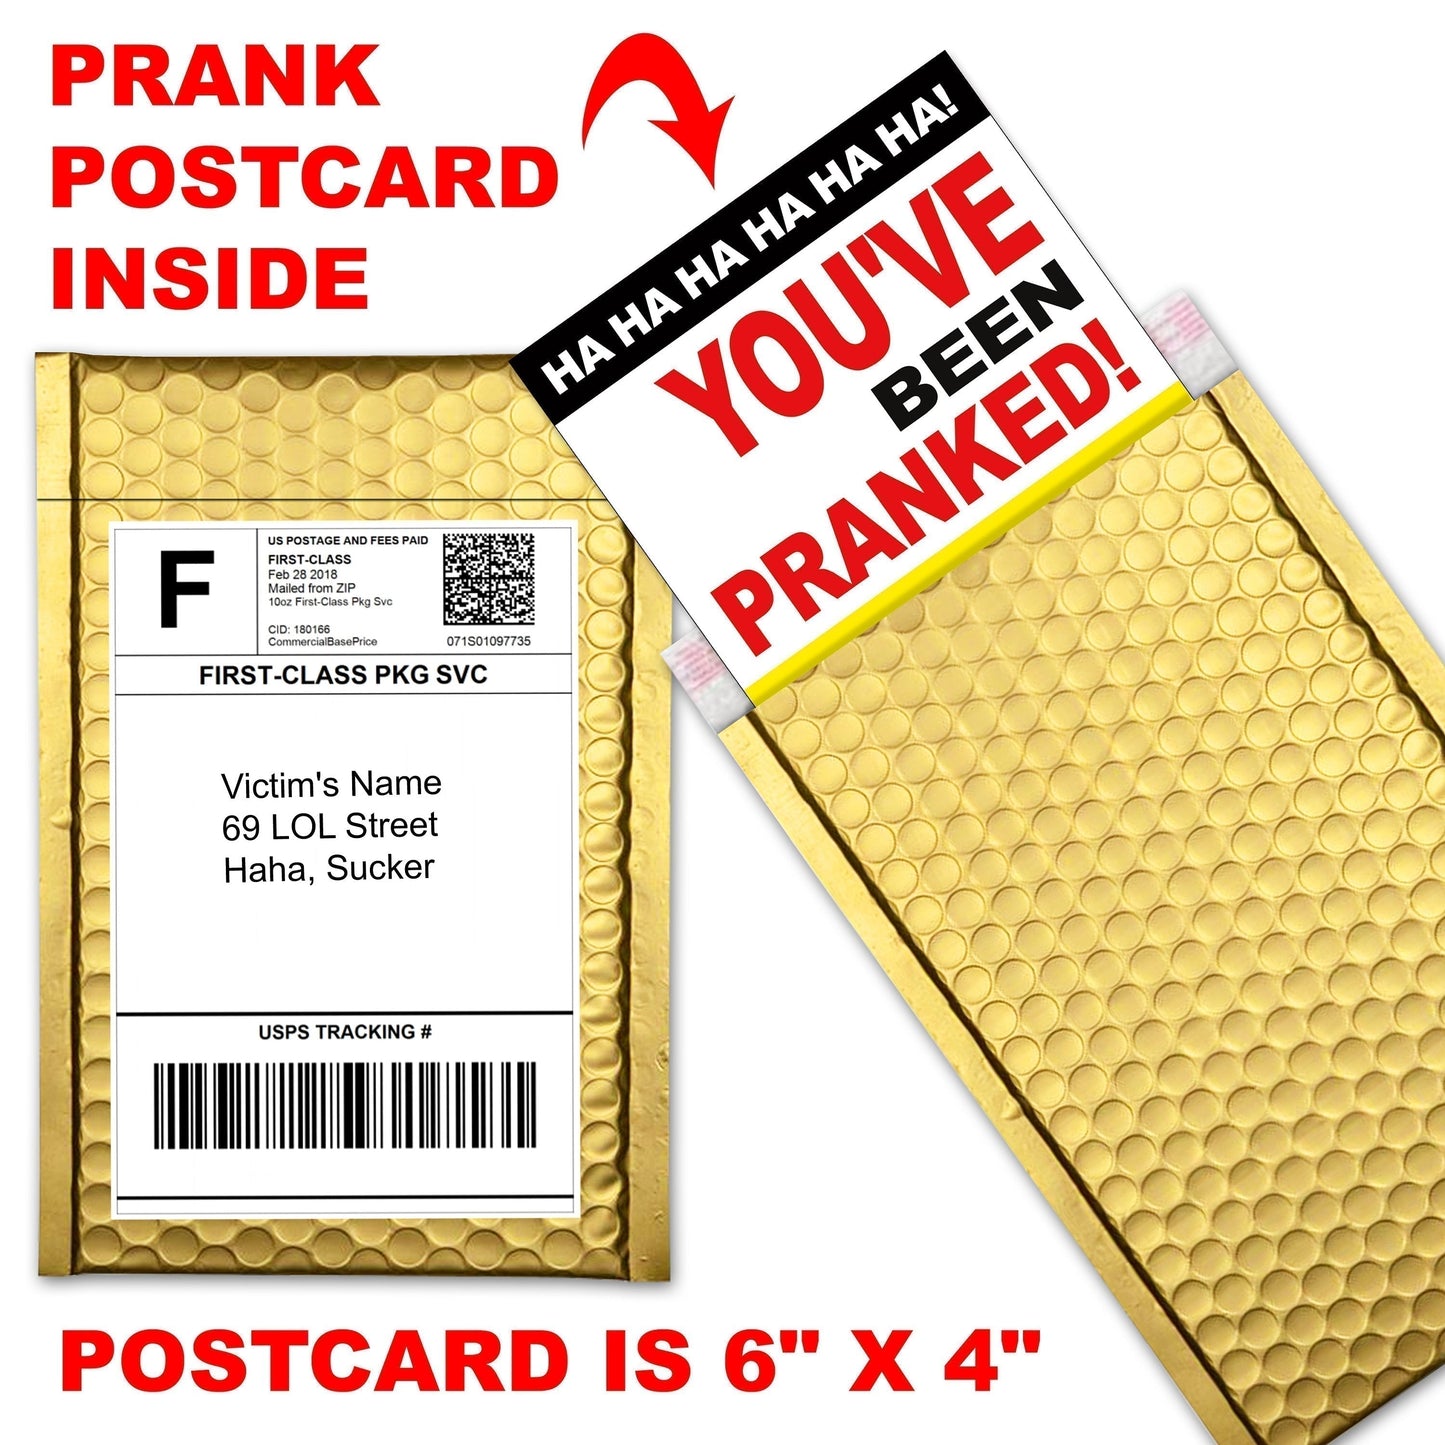 IBS Diarrhea embarrassing prank envelope gets mailed directly to your victims 100% anonymously!